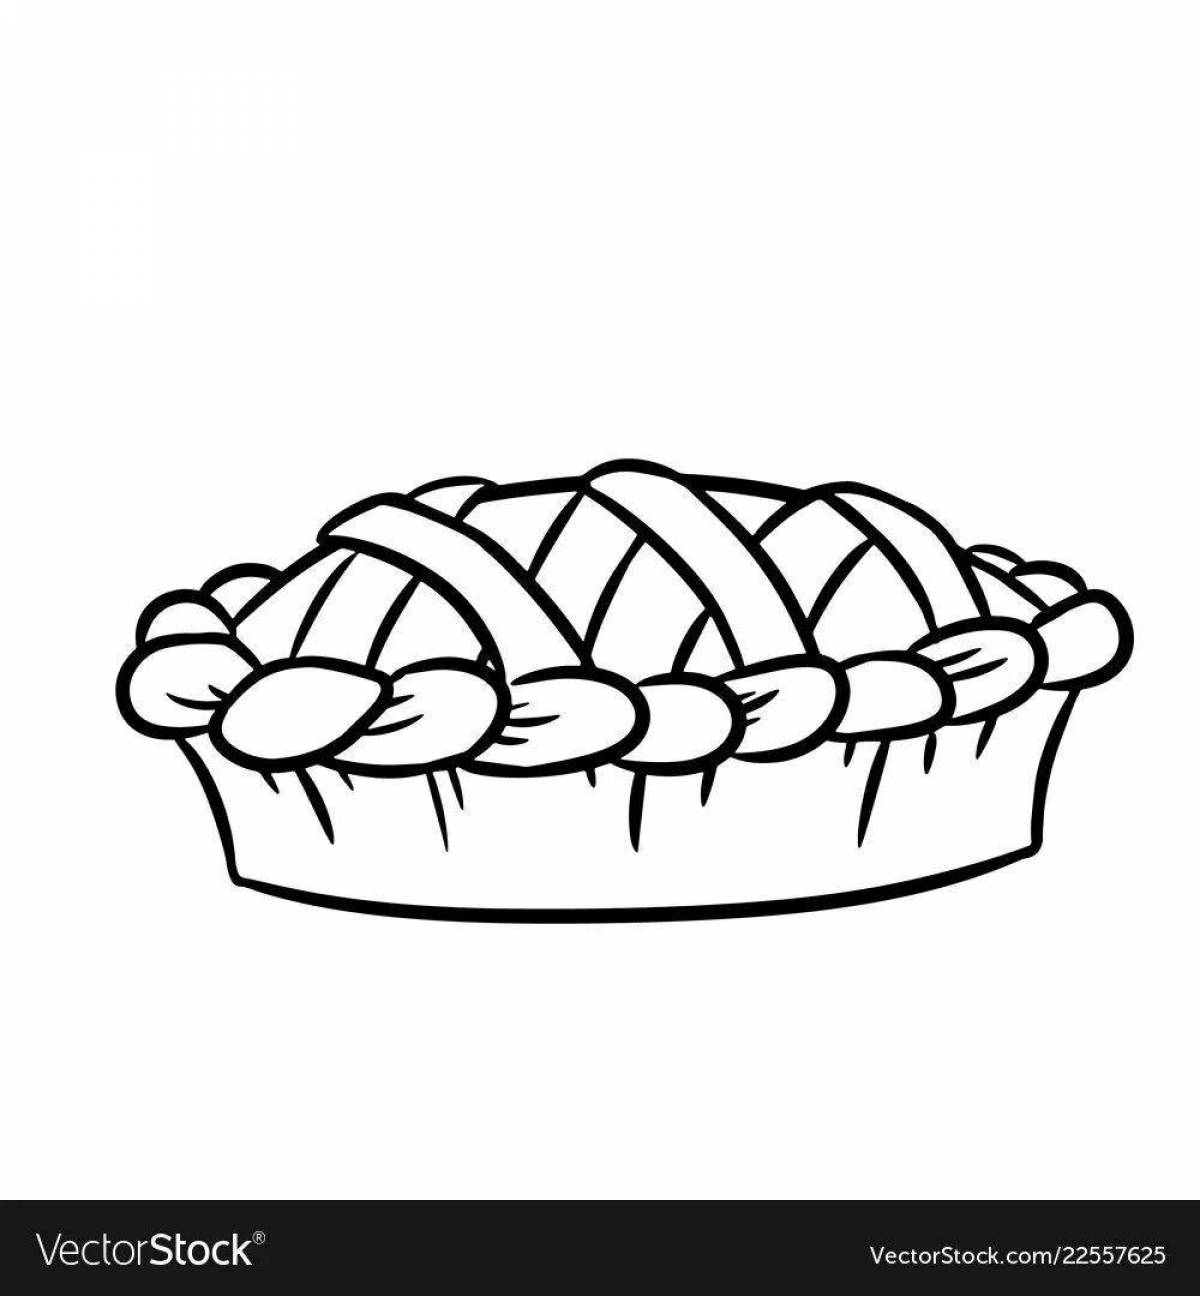 Adorable pie coloring book for kids